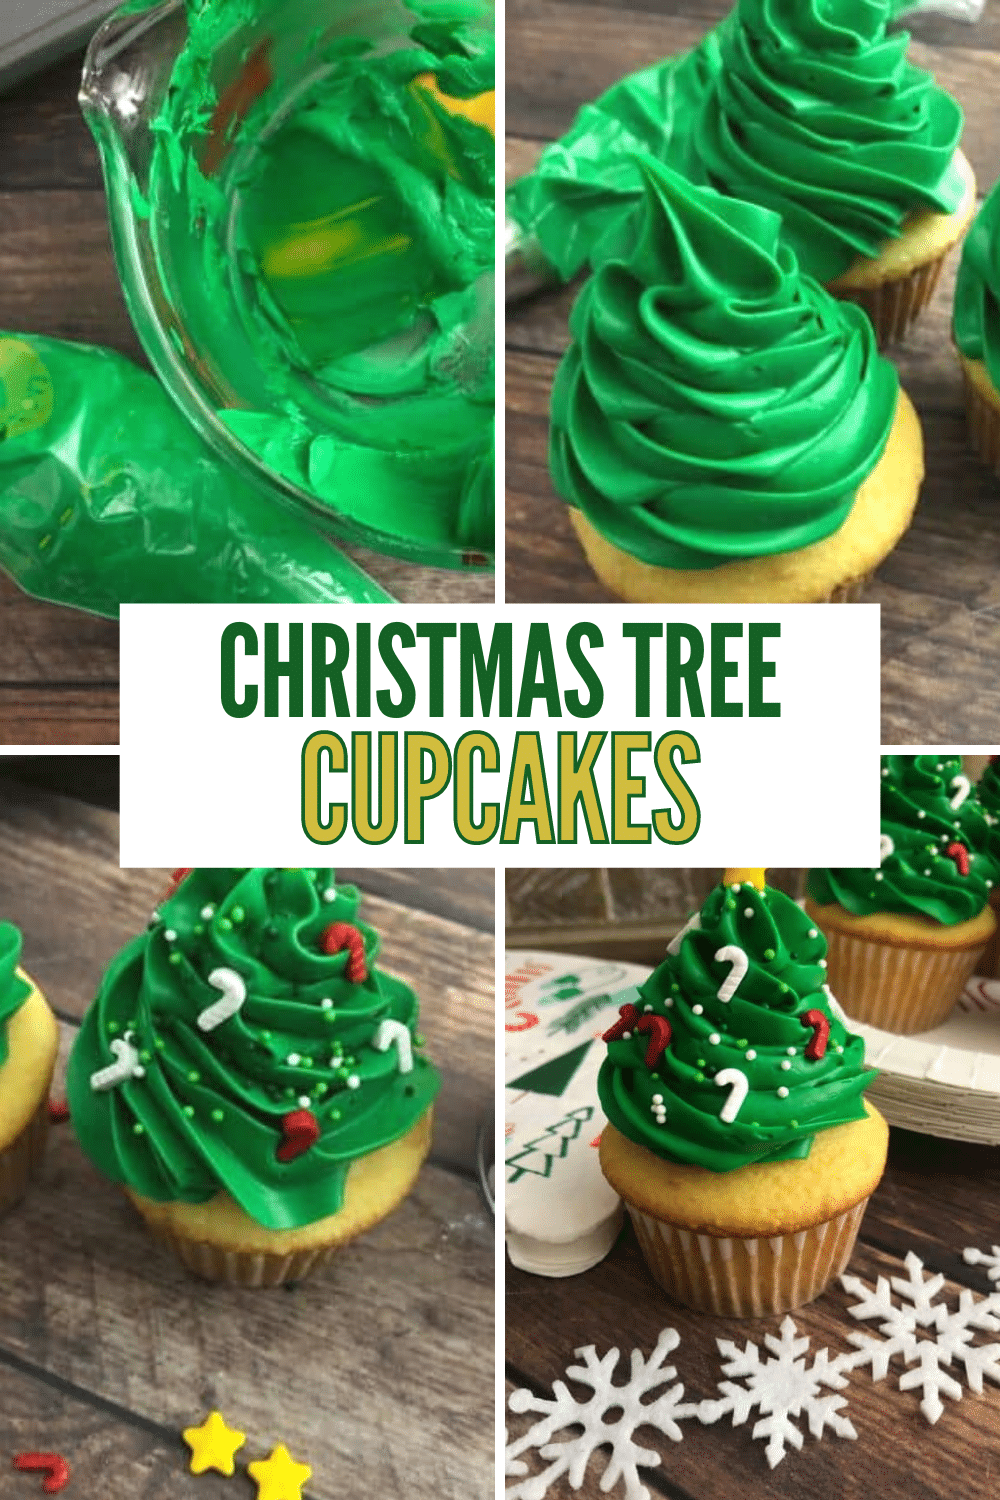 These Easy Christmas Tree Cupcakes are a delicious treat and adorable party decoration all in one! Why not dress up your dessert table with these standout desserts! #christmas #cupcakes #christmastree #recipe via @wondermomwannab